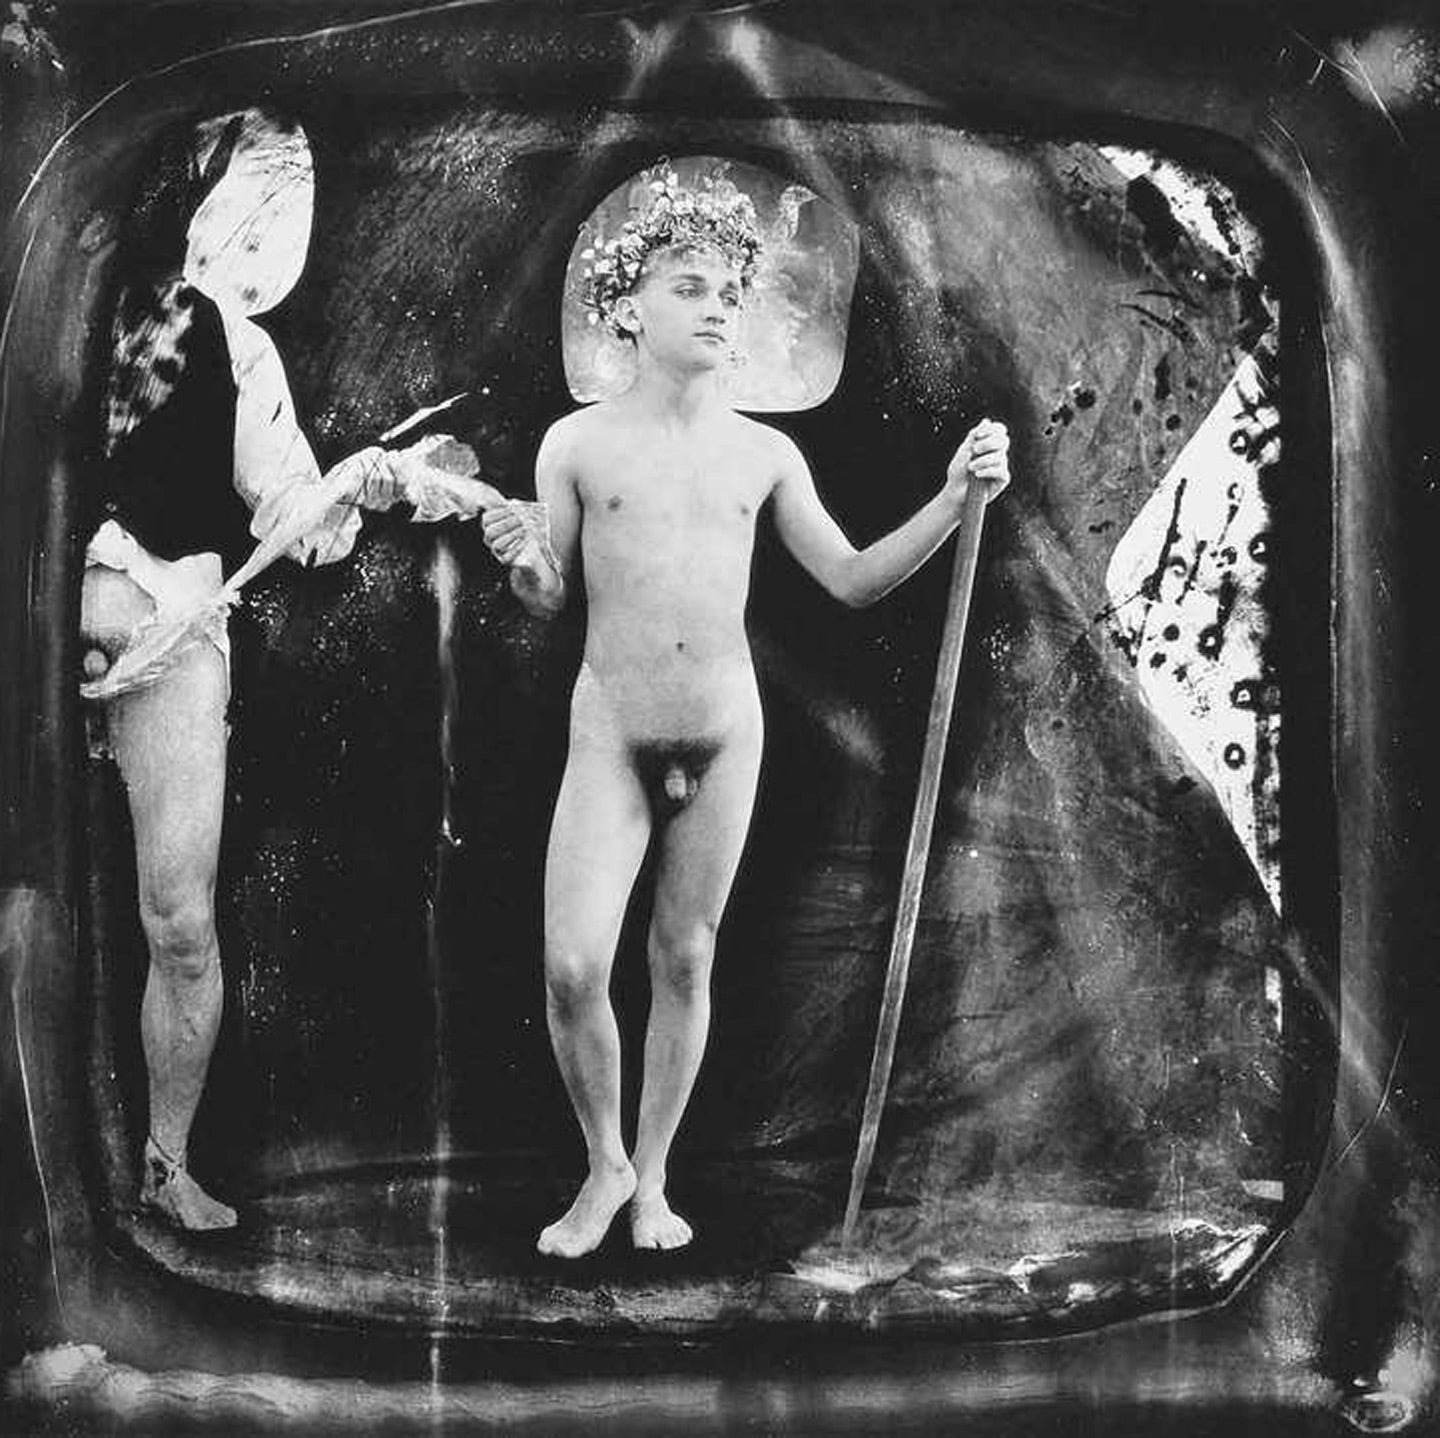 Joel-Peter Witkin: Songs of Experience, Limited Edition, and Songs of Innocence, Limited Edition (21st Platinum Edition) (with a Total, in Both Editions, of 2 Freestanding and 20 Bound Platinum Prints)